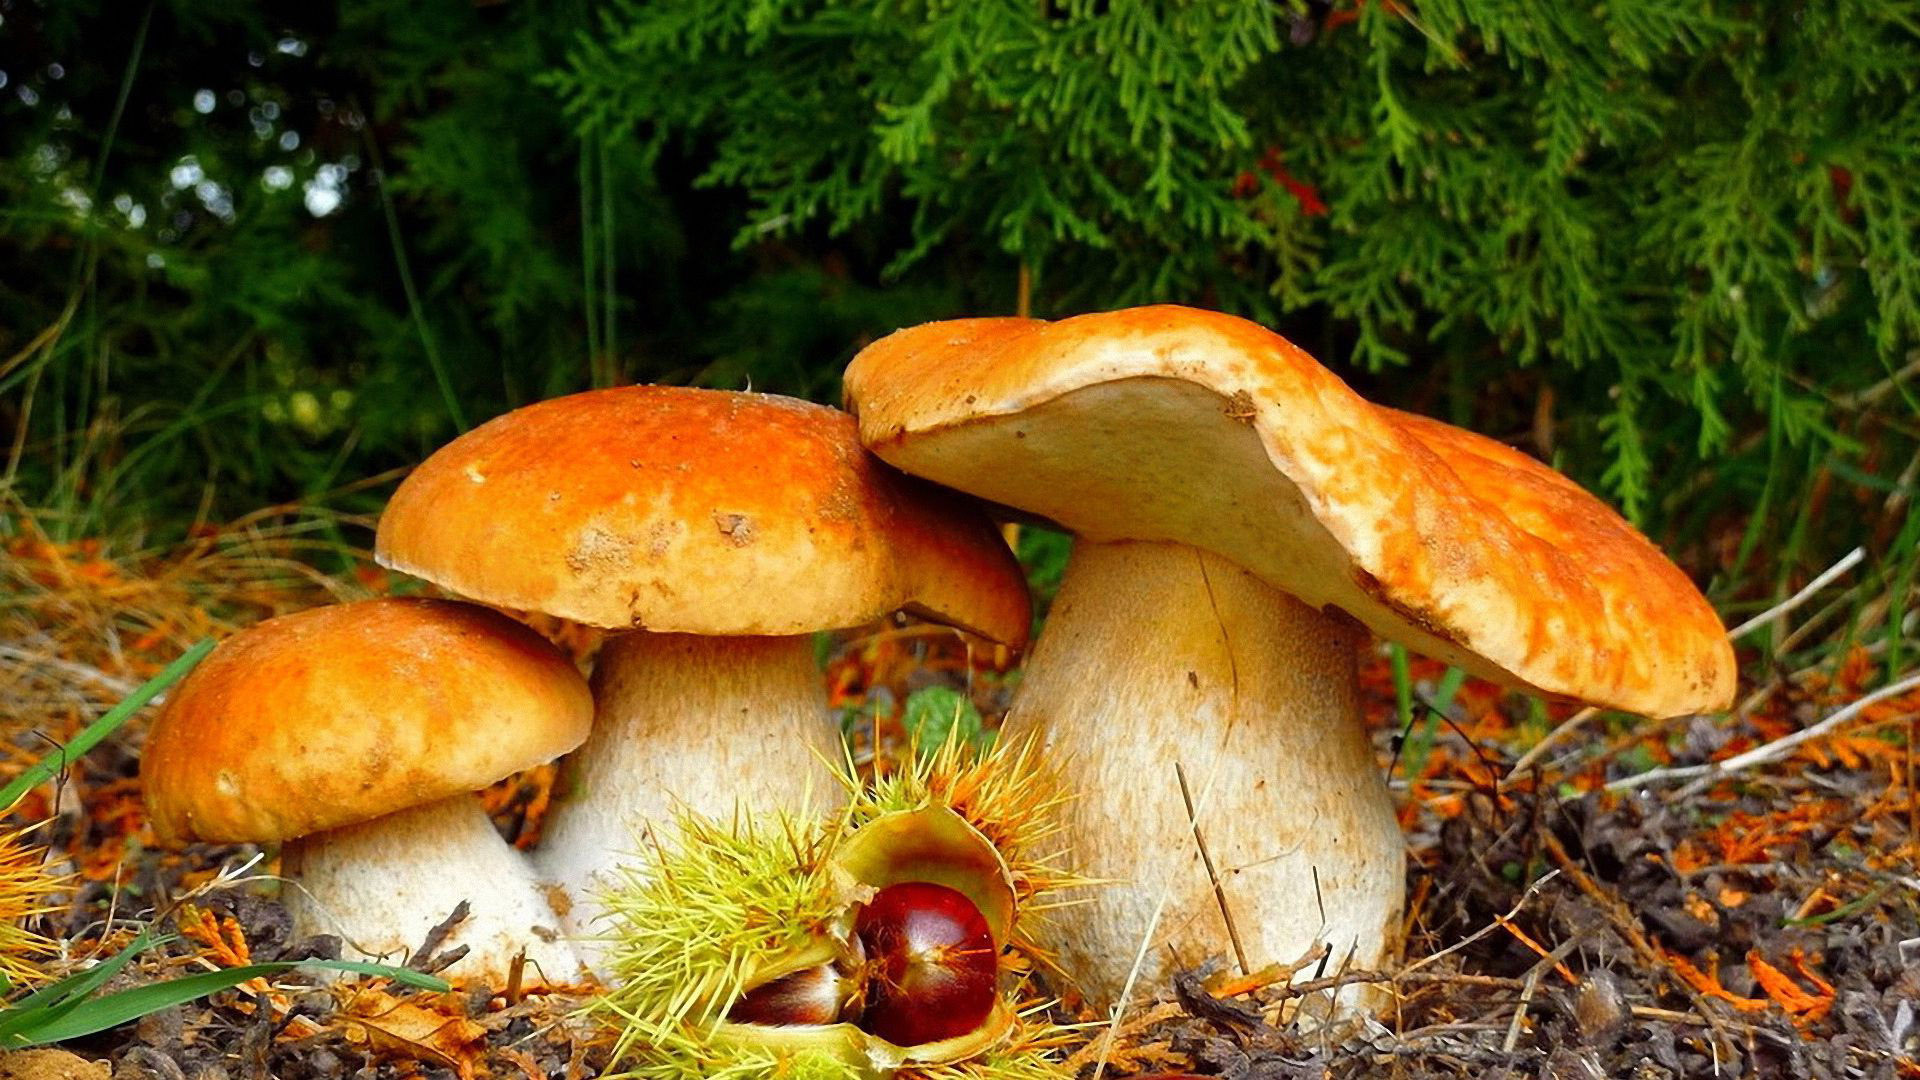 Cute Mushroom Background Wallpaper Image For Free Download  Pngtree